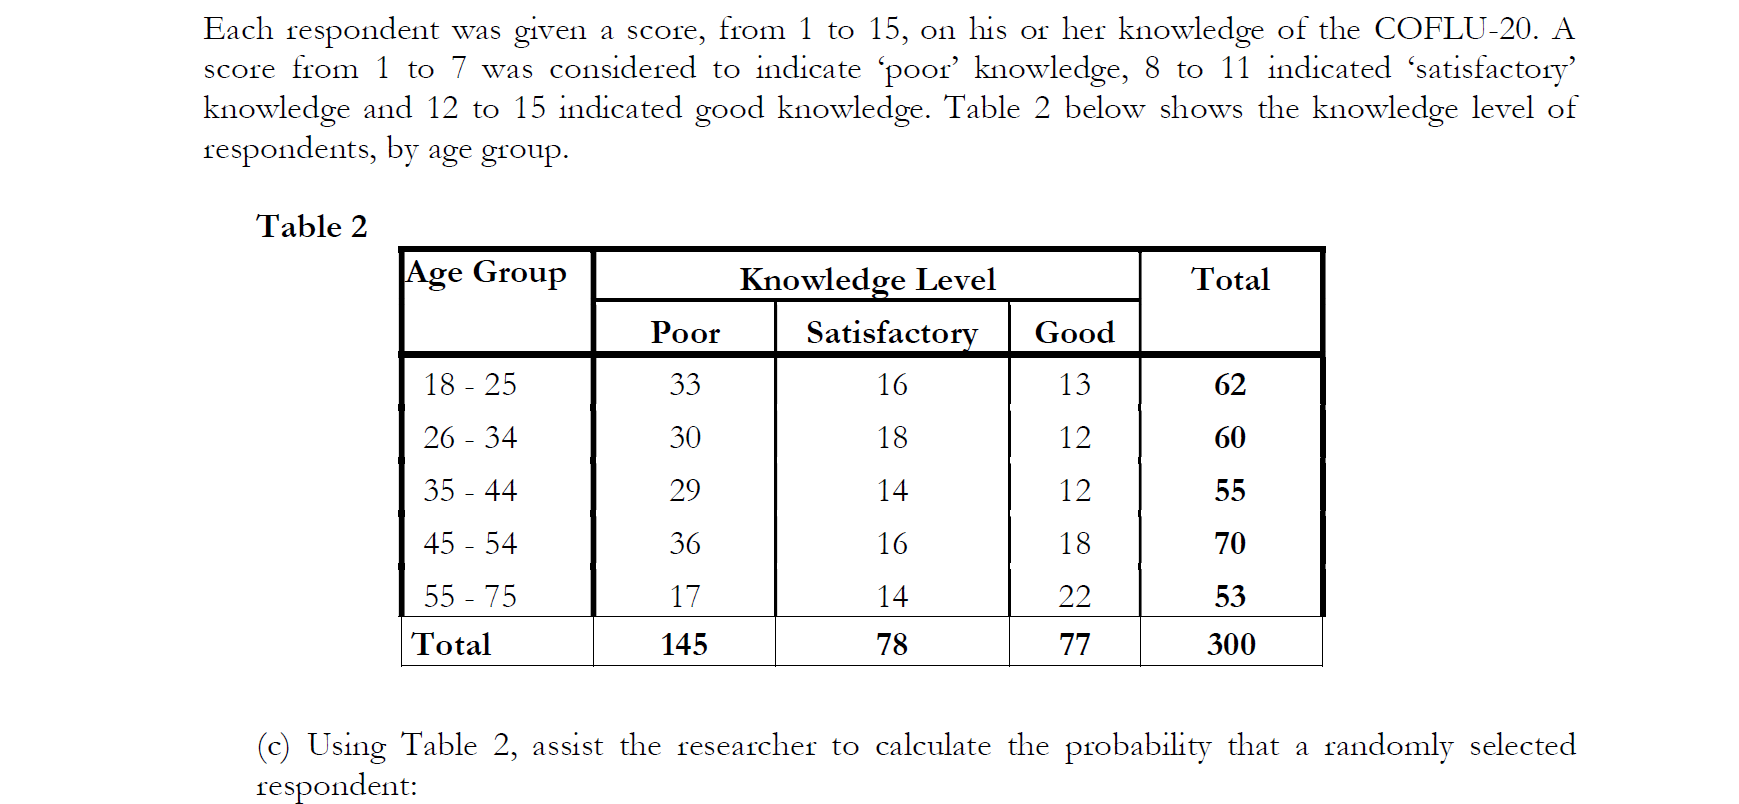 Each respondent was given a score, from 1 to 15, on his or her knowledge of the COFLU-20. A
score from 1 to 7 was considered to indicate 'poor' knowledge, 8 to 11 indicated 'satisfactory'
knowledge and 12 to 15 indicated good knowledge. Table 2 below shows the knowledge level of
respondents, by age group.
Table 2
Age Group
Knowledge Level
Total
Poor
Satisfactory
Good
18 - 25
33
16
13
62
26 - 34
30
18
12
60
35 - 44
29
14
12
55
45 - 54
36
16
18
70
55 - 75
17
14
22
53
Total
145
78
77
300
(c) Using Table 2, assist the researcher to calculate the probability that a randomly selected
respondent:
